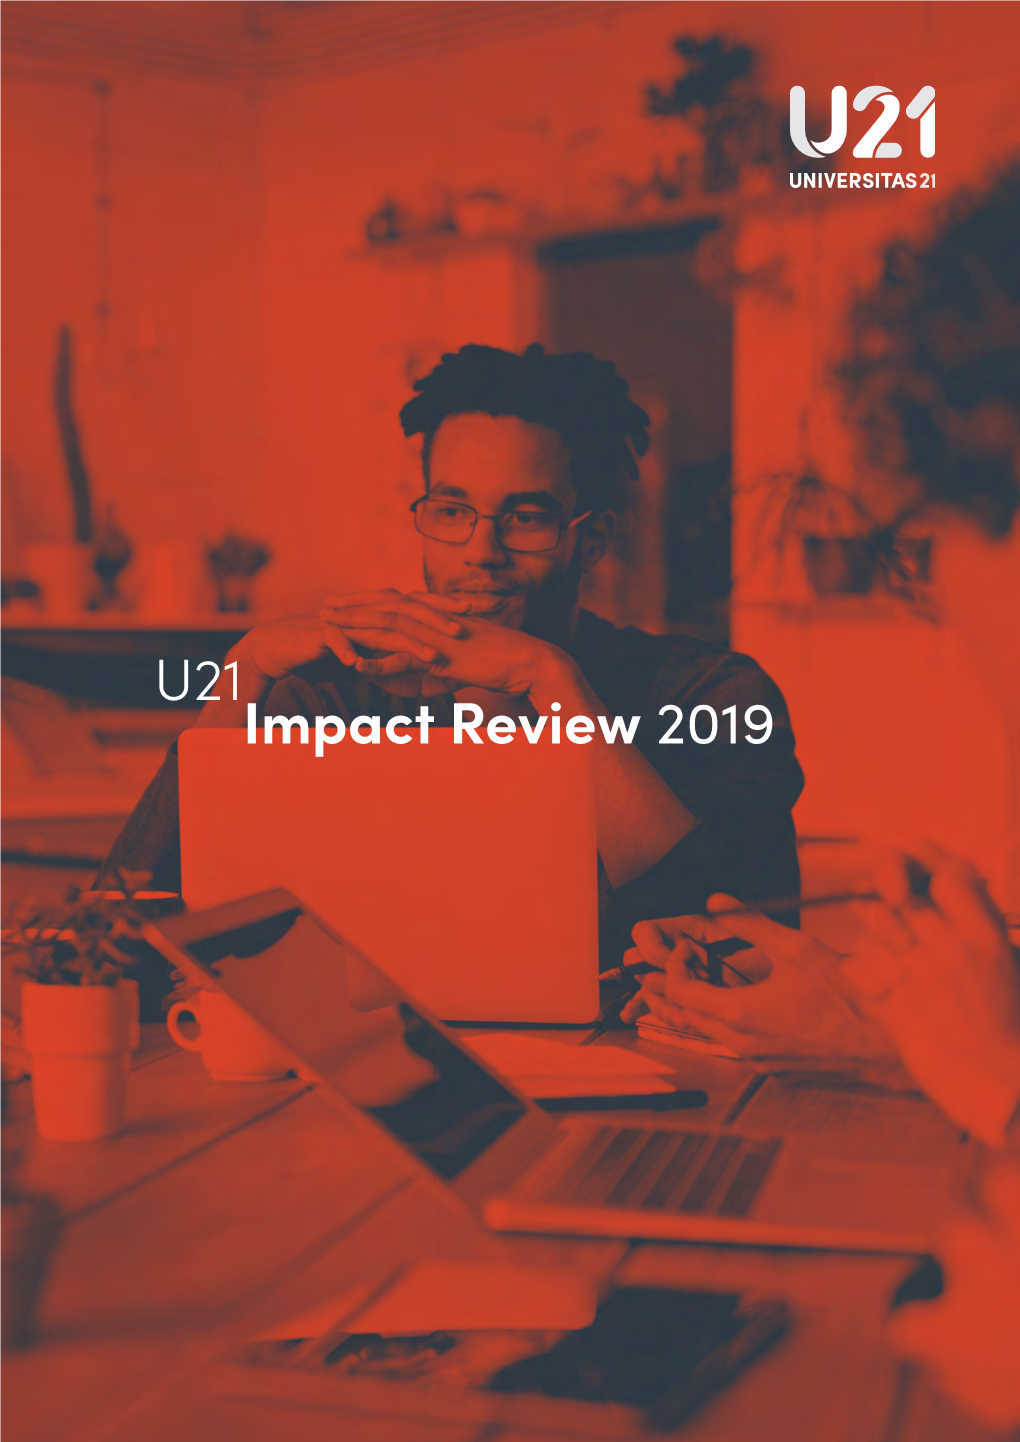 U21 Impact Review 2019 Positive 16 Change Inspirational for Society Projects Contents